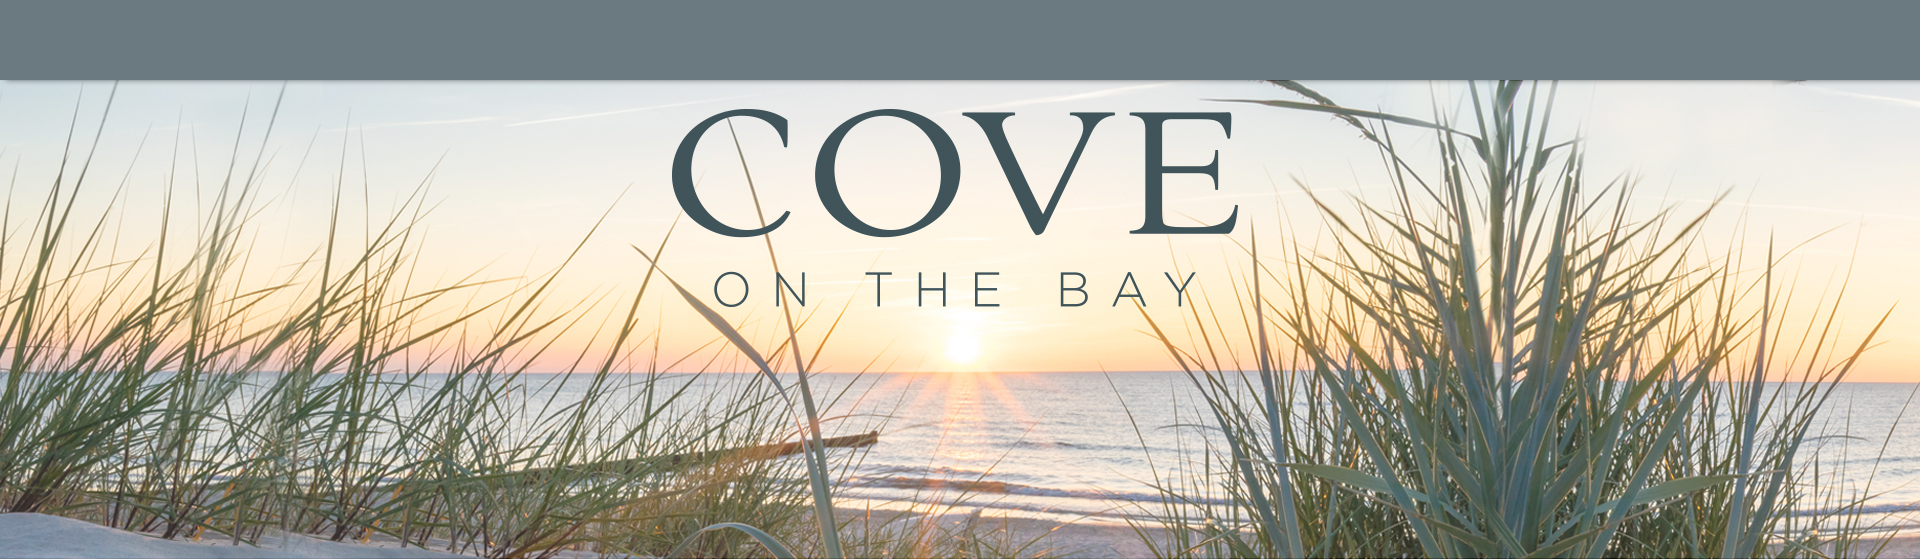 Cove on the Bay